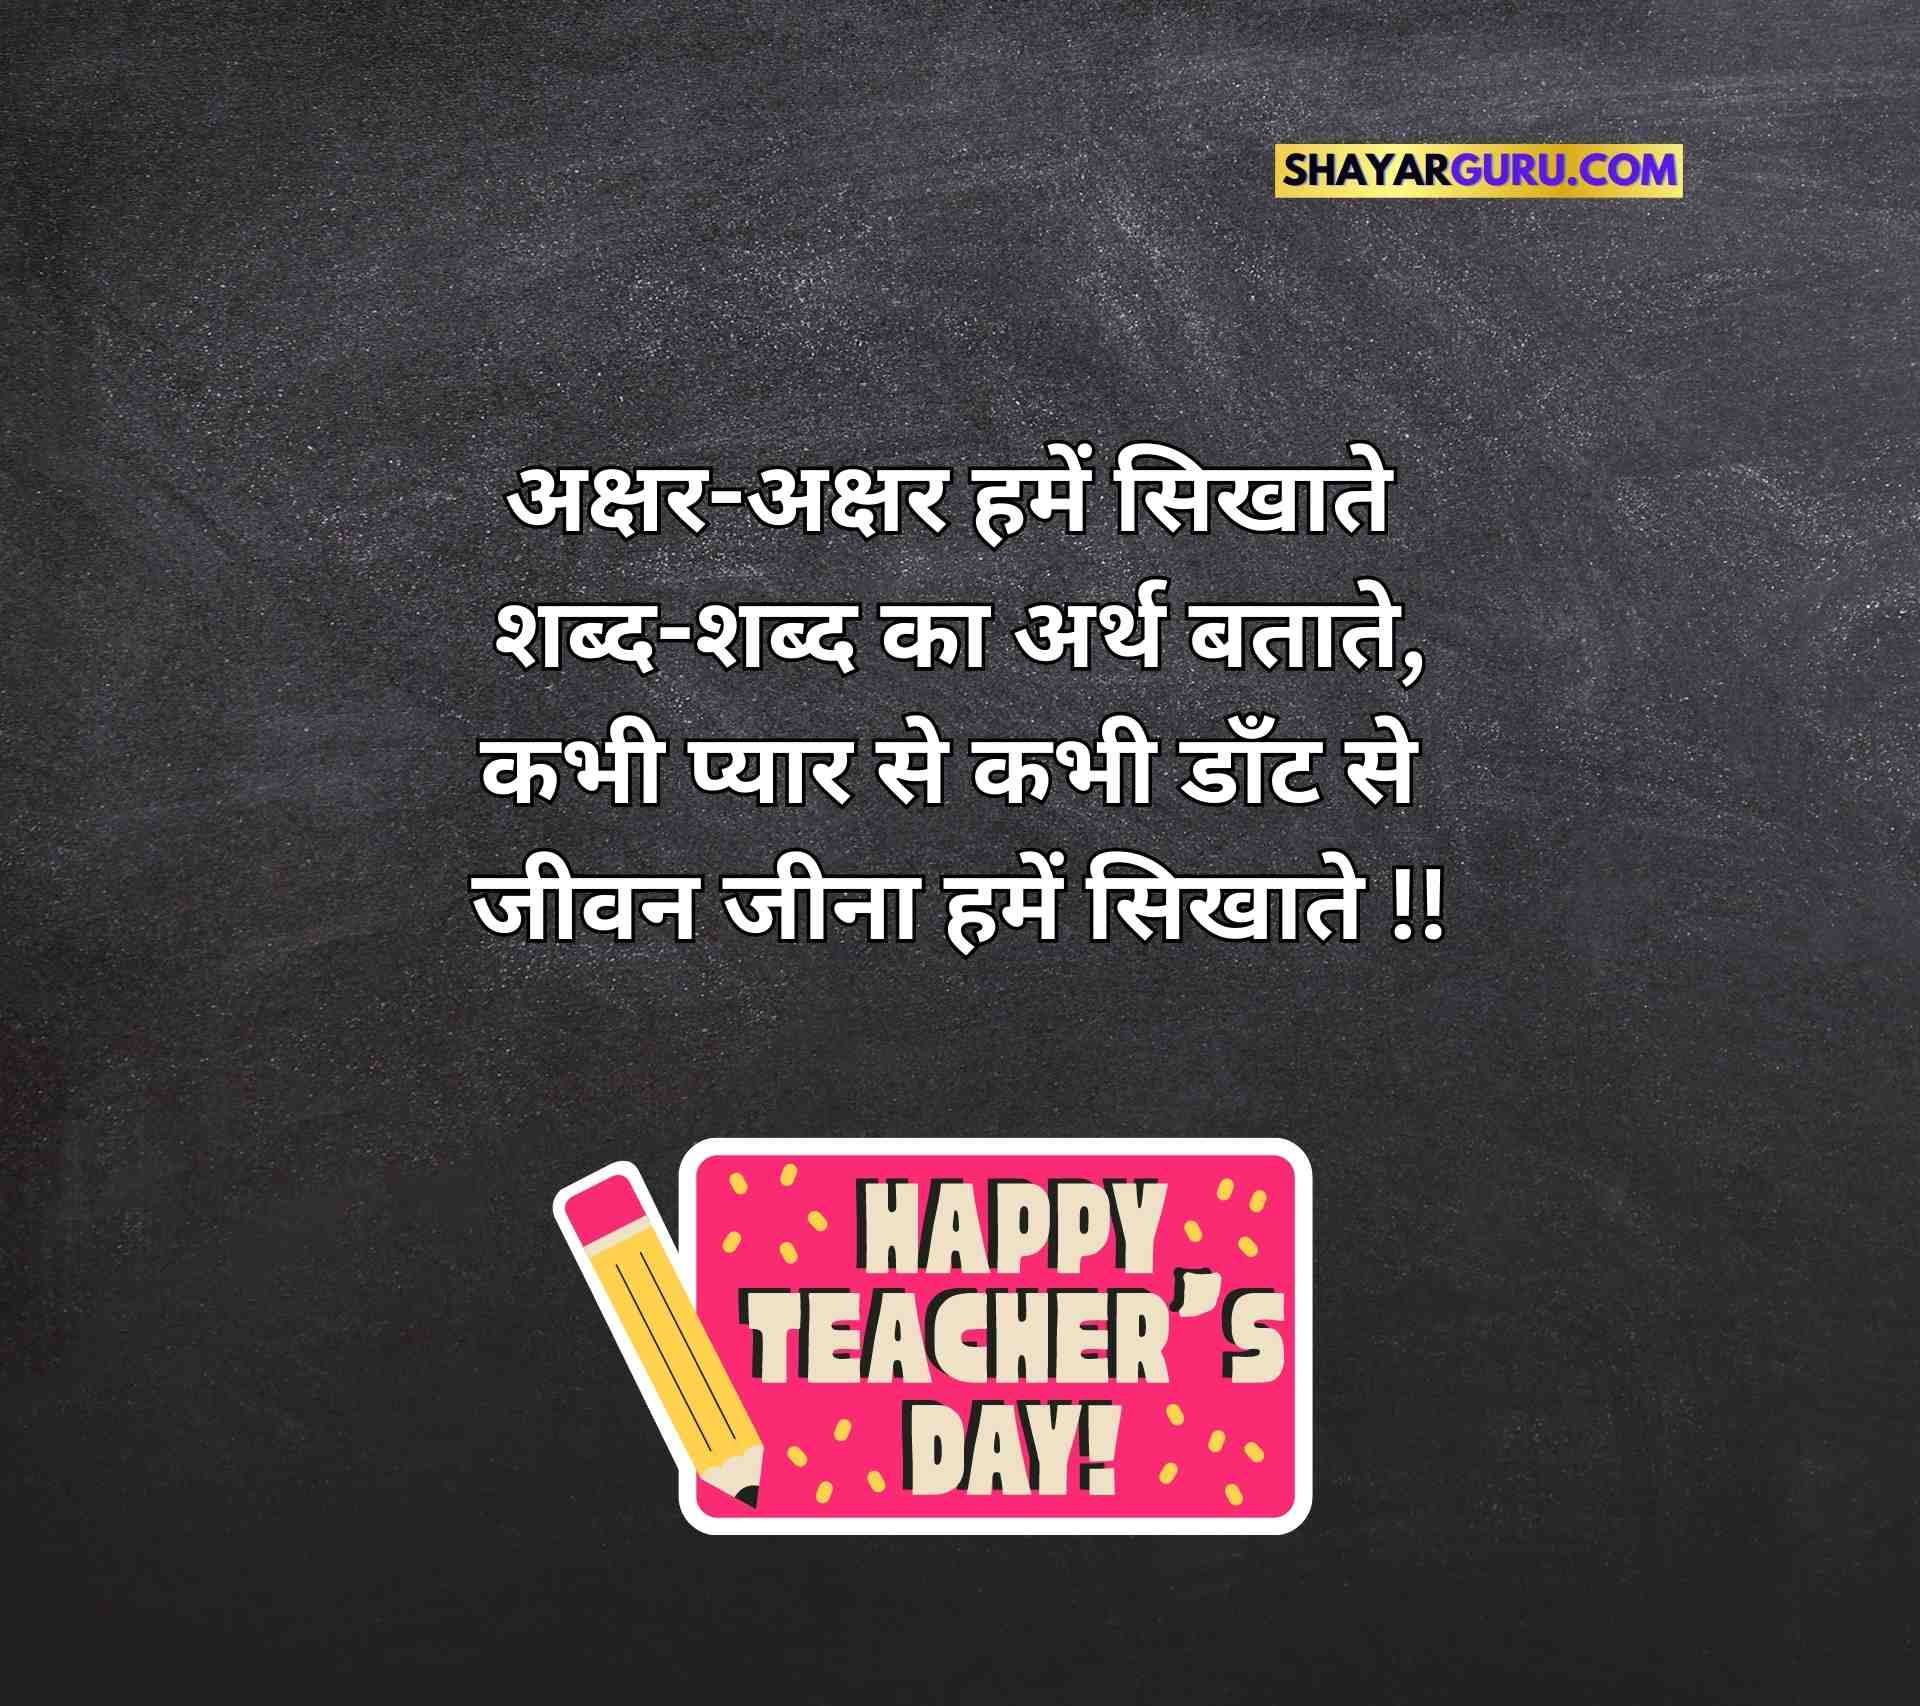 Teachers Day Quotes in Hindi Image